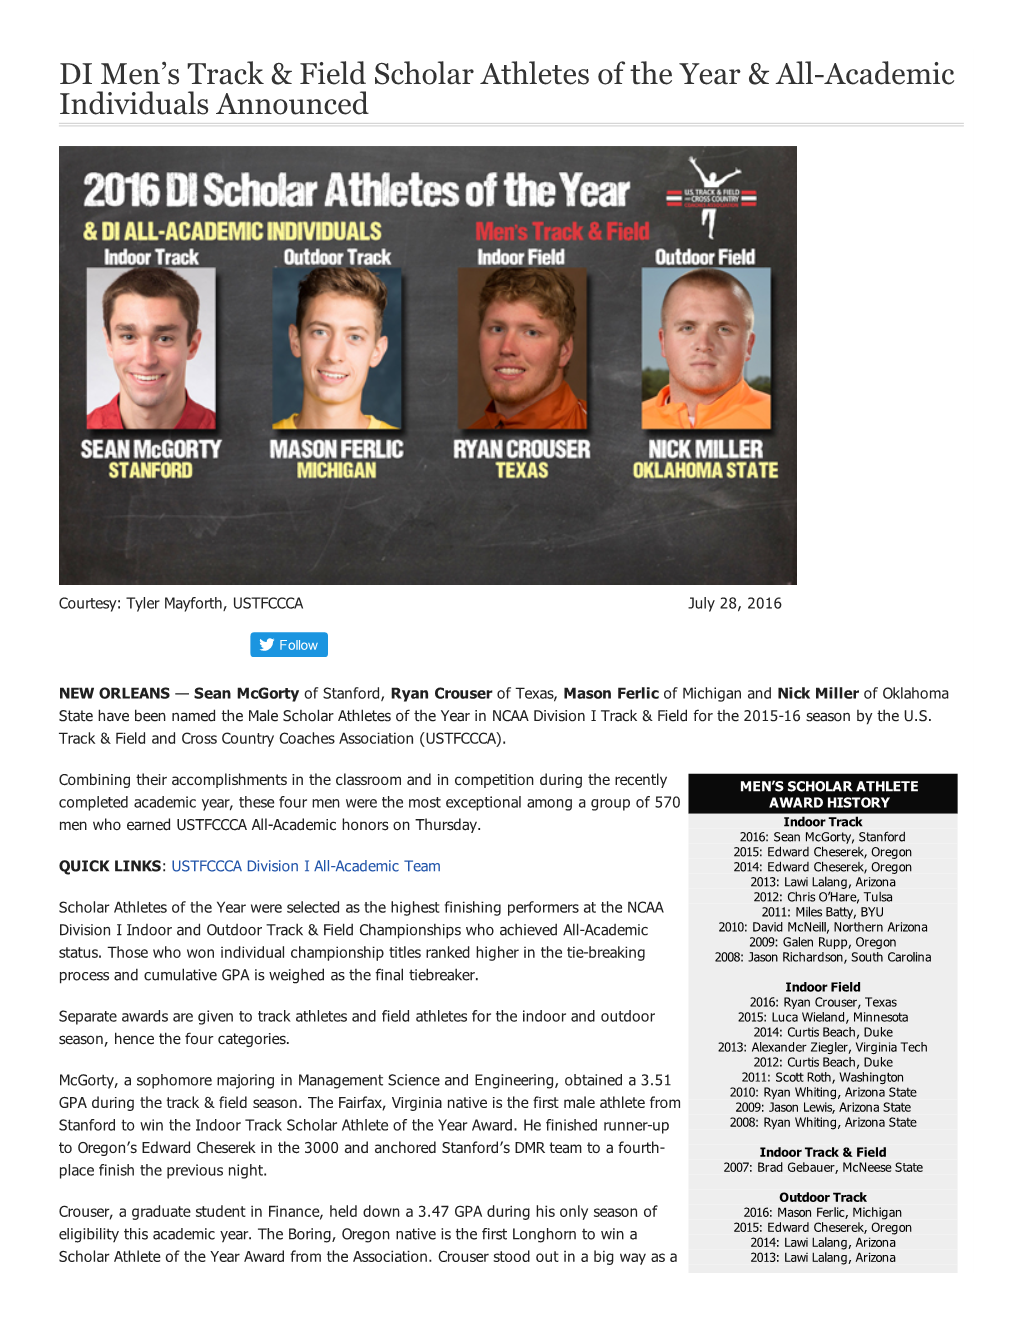 DI Men's Track & Field Scholar Athletes of the Year & Allacademic